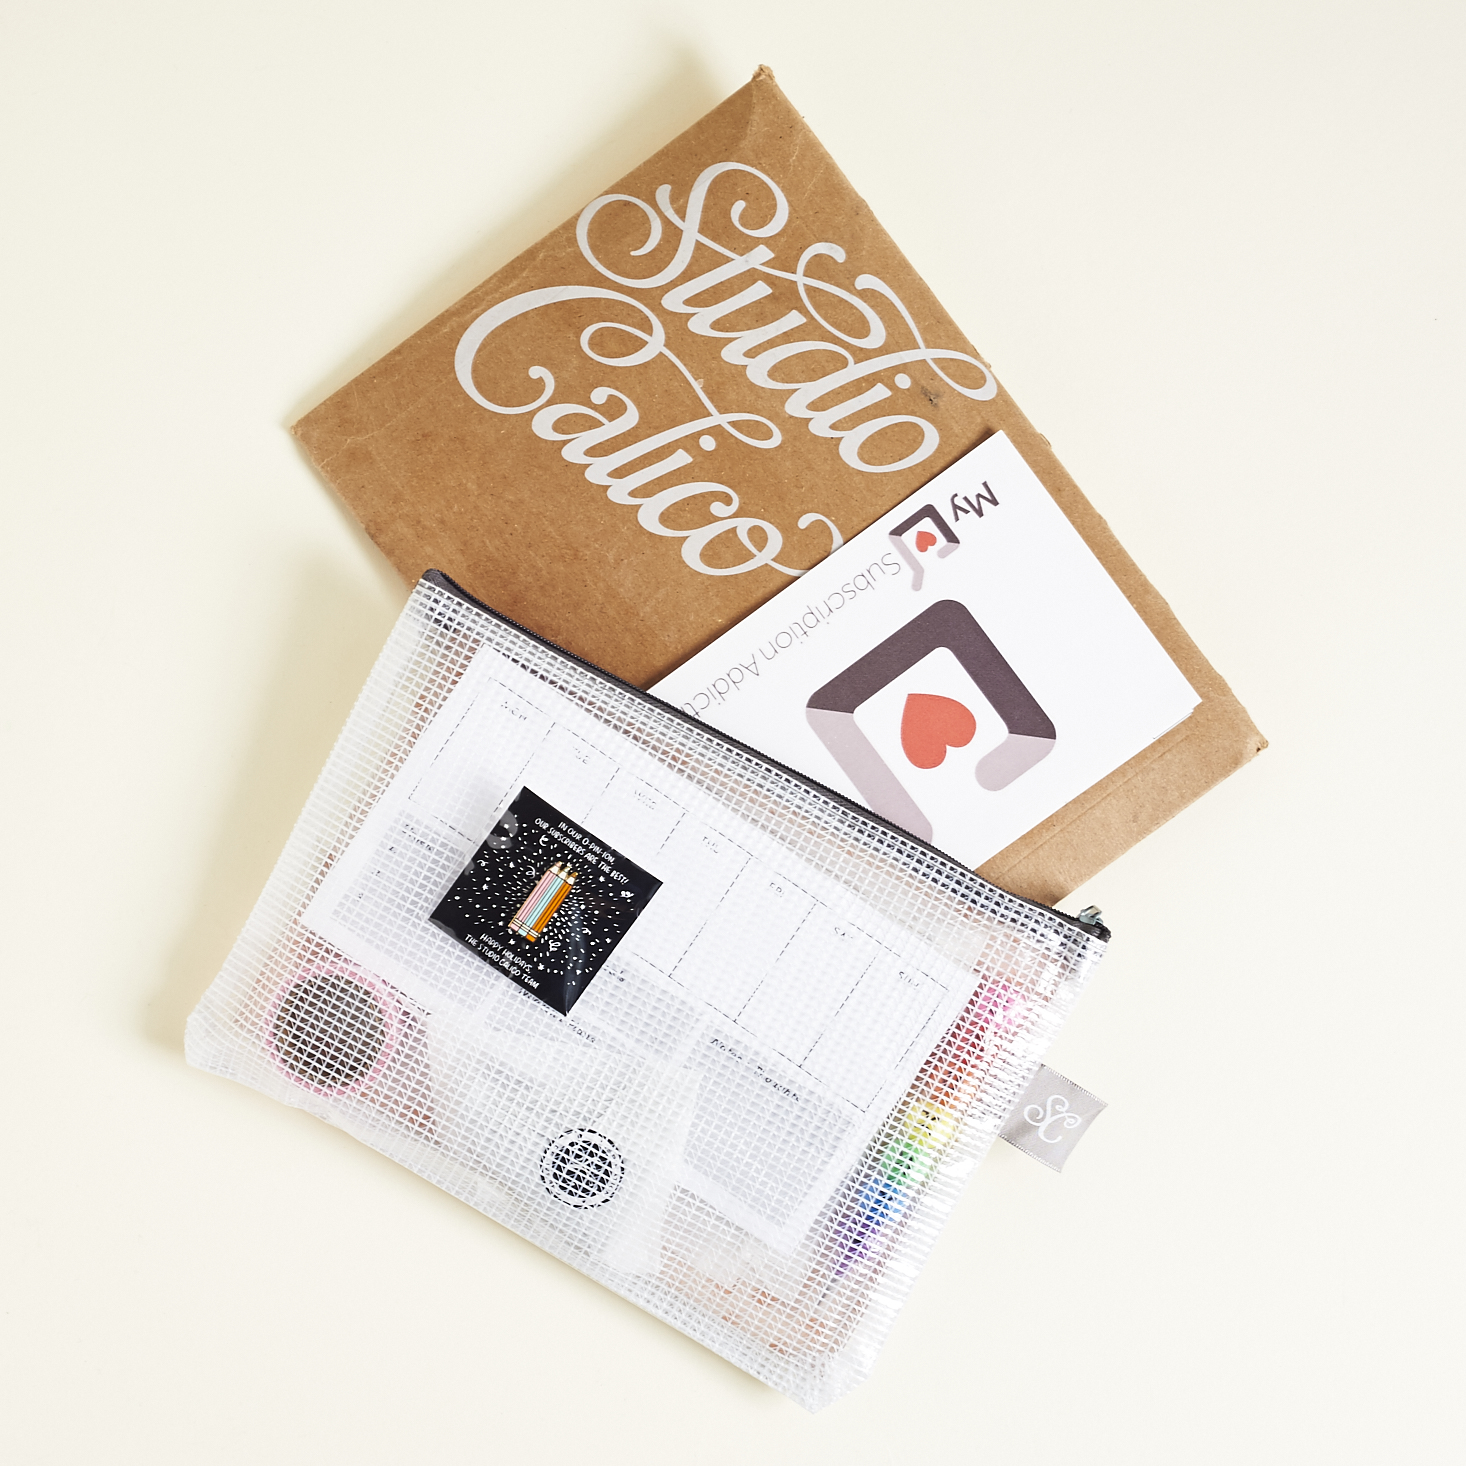 Read our review of the December 2016 Studio Calico box!